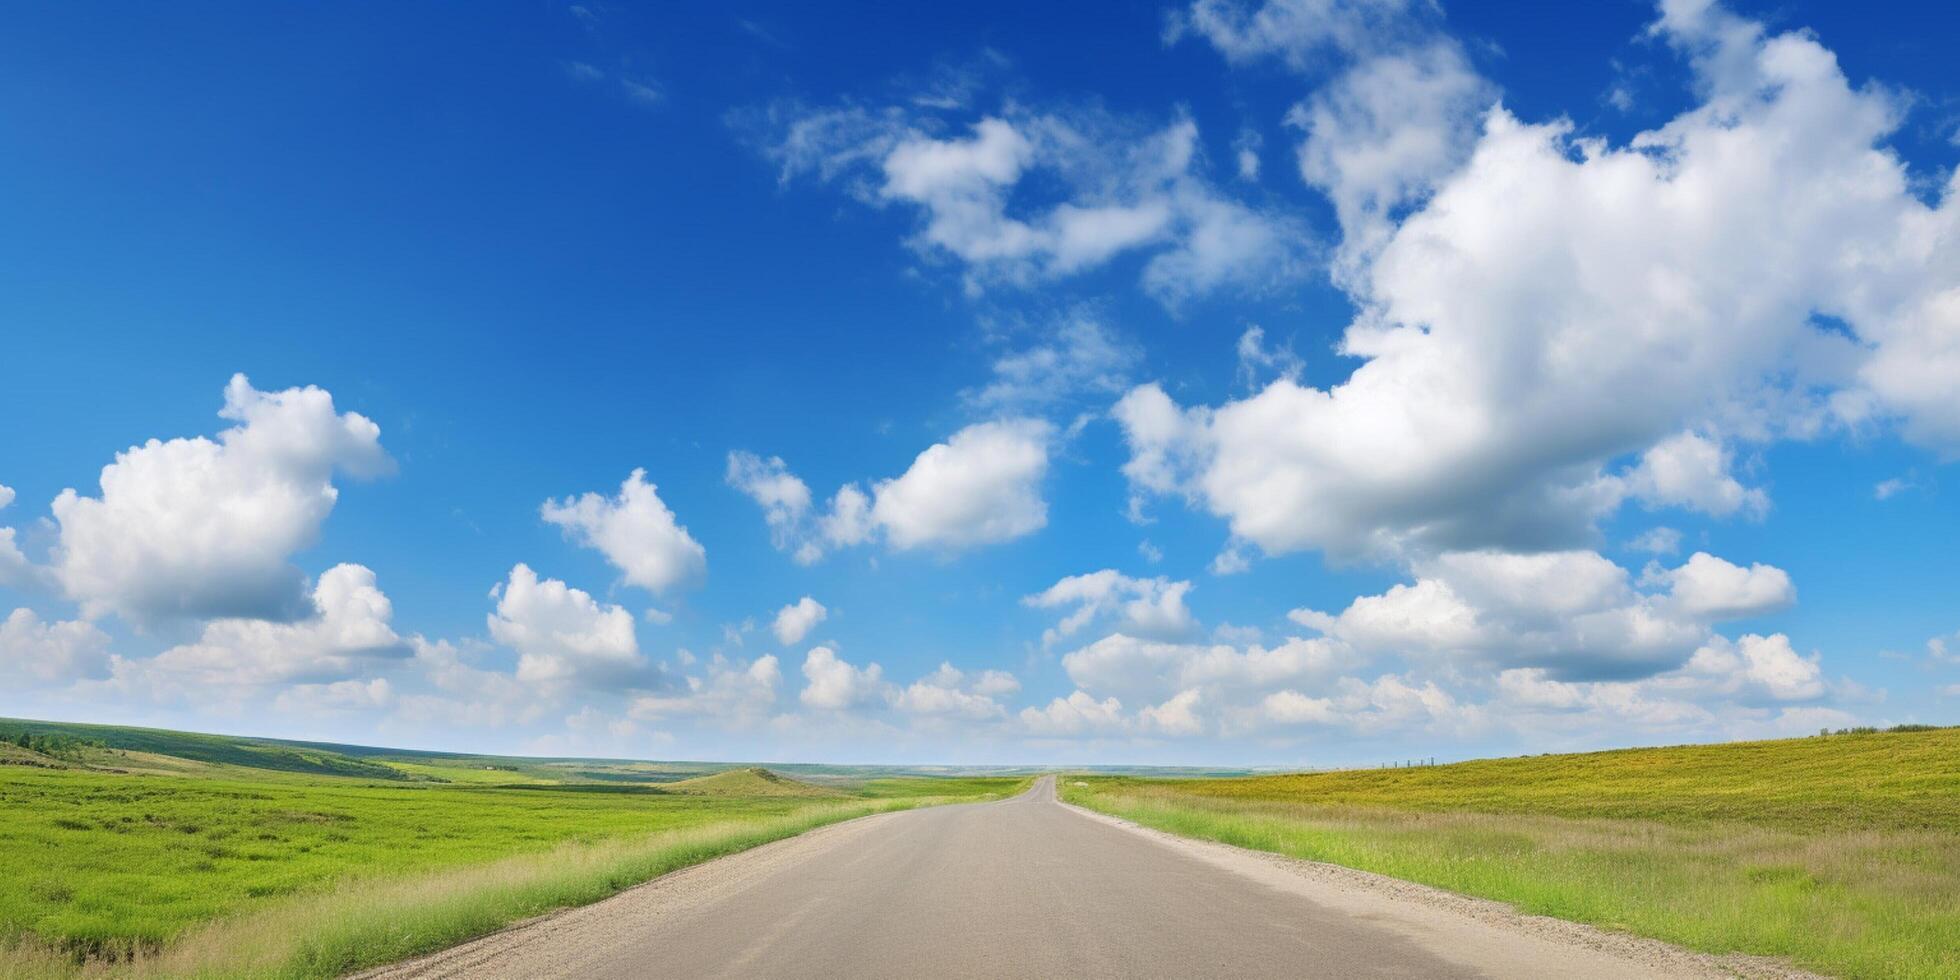 A road with a blue sky and clouds photo